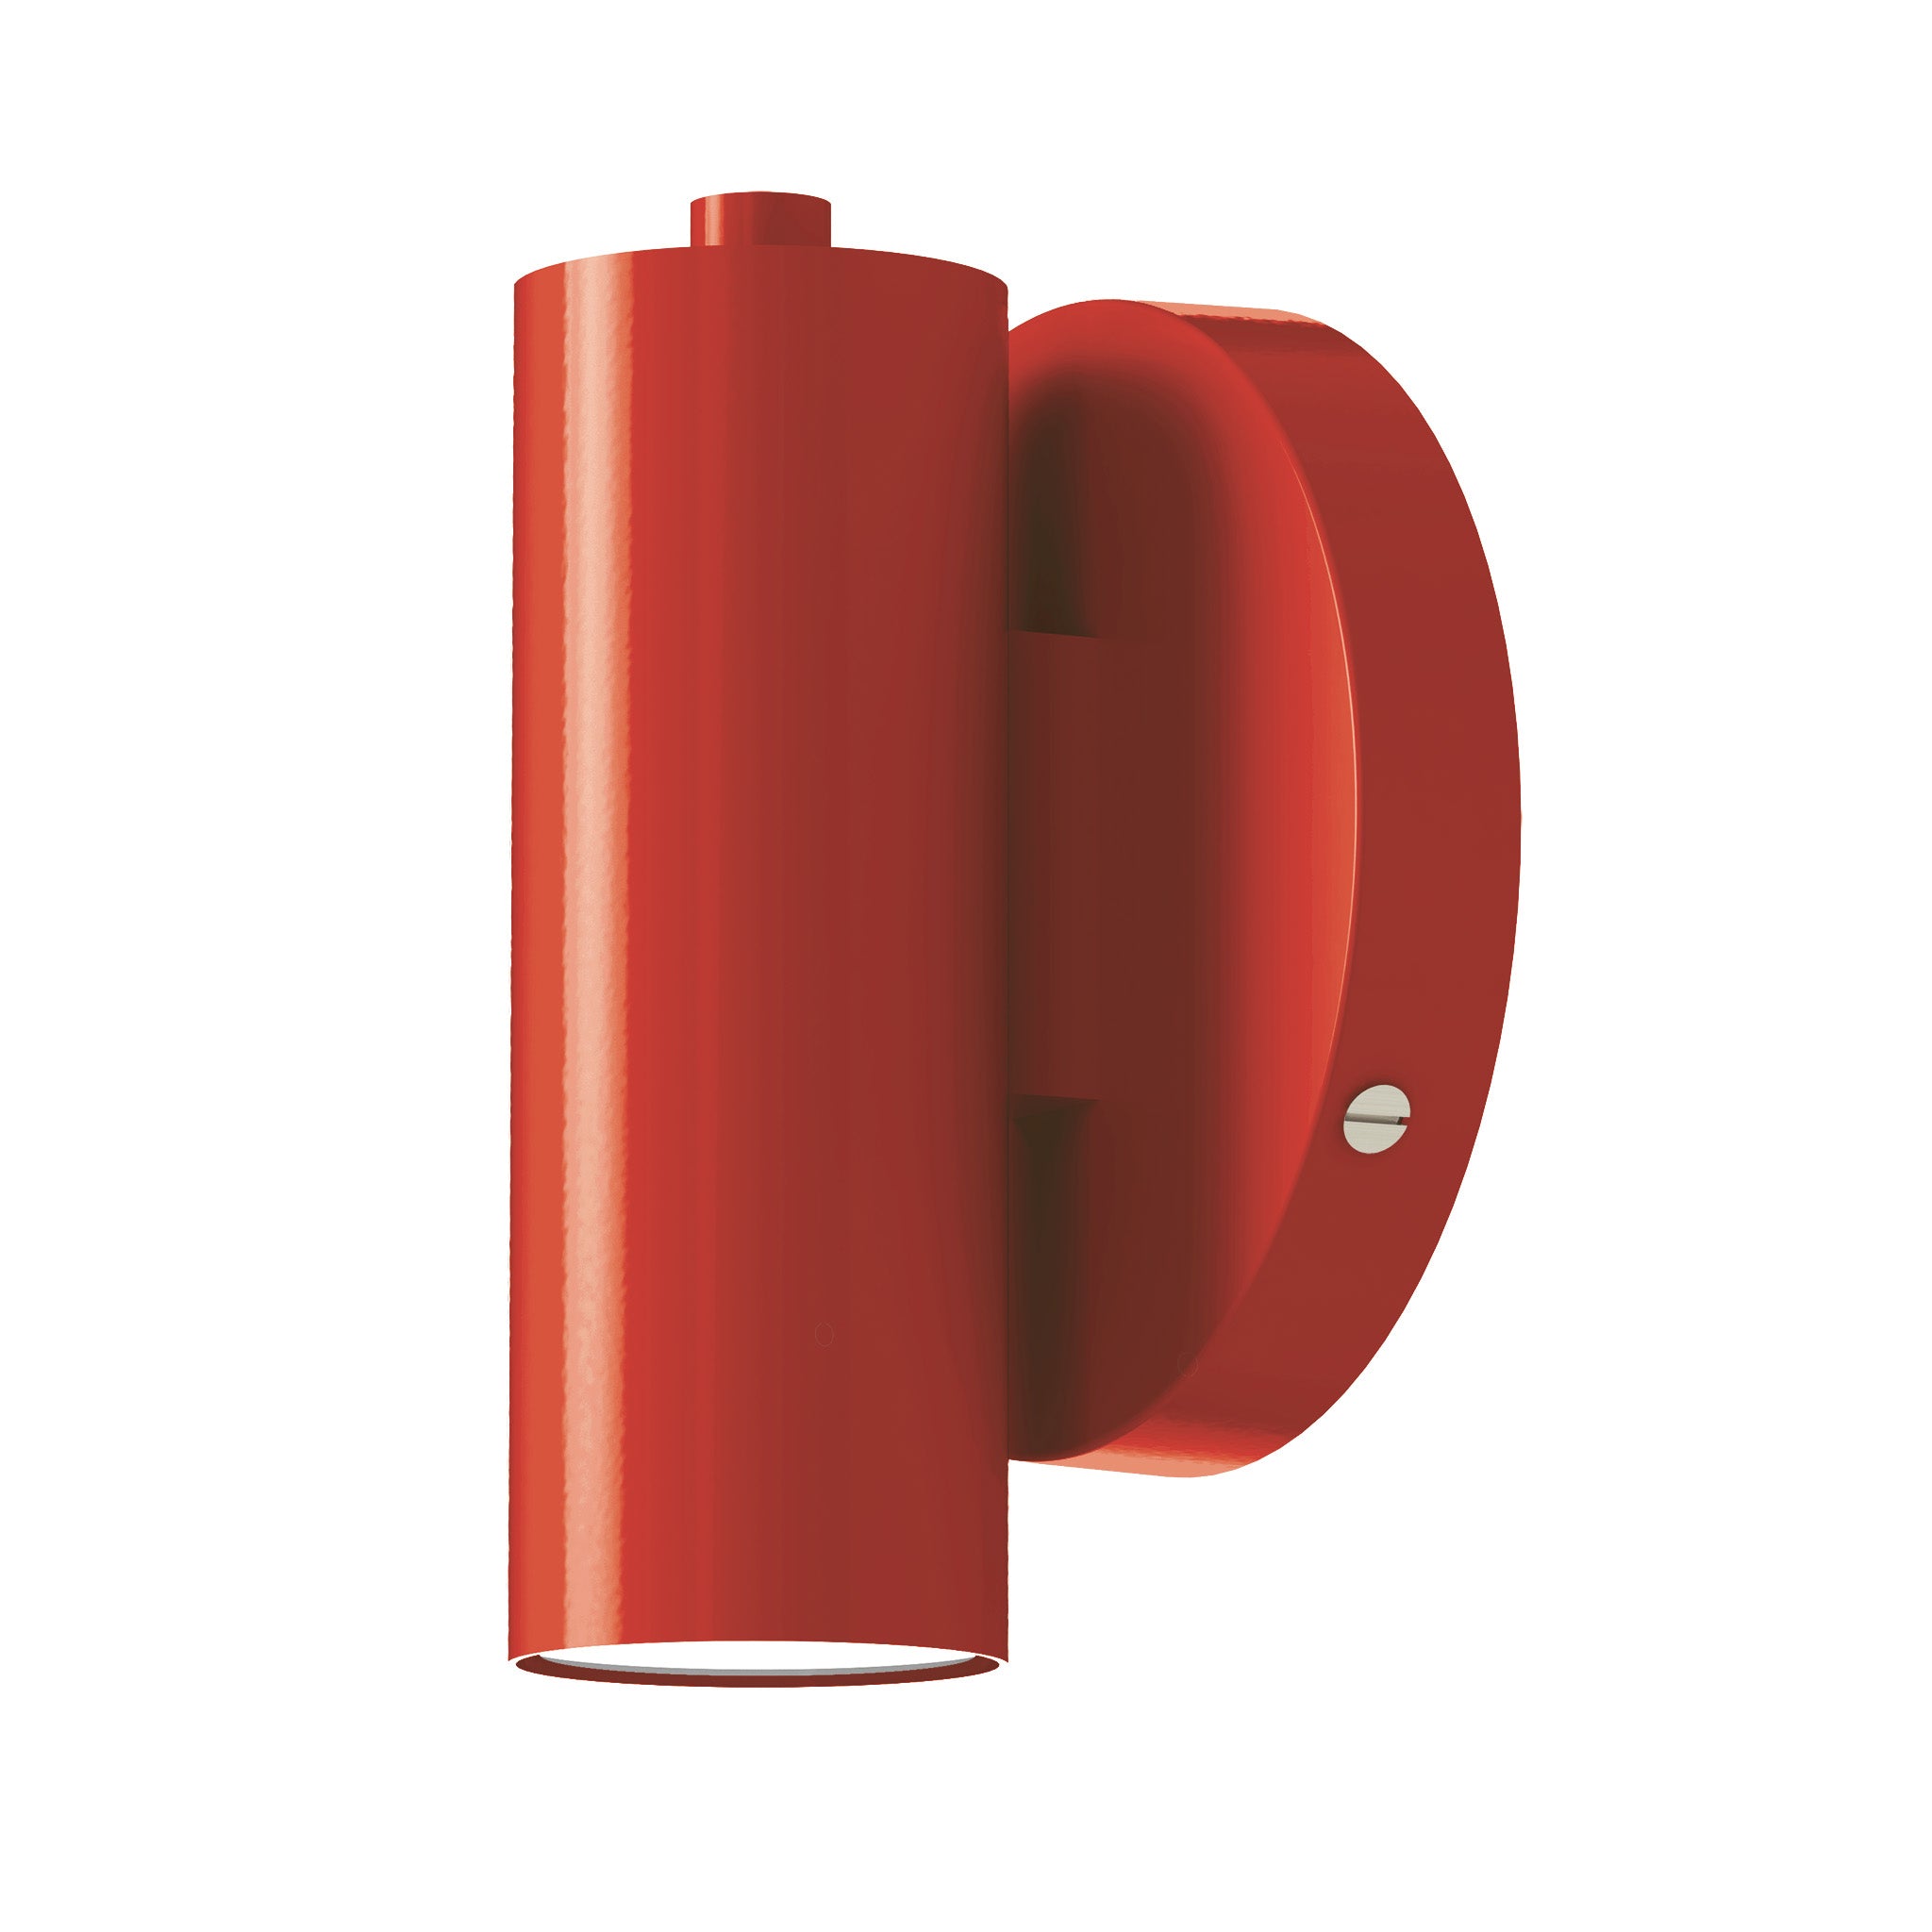 Nickel and riding hood red display wall sconce dutton brown lighting